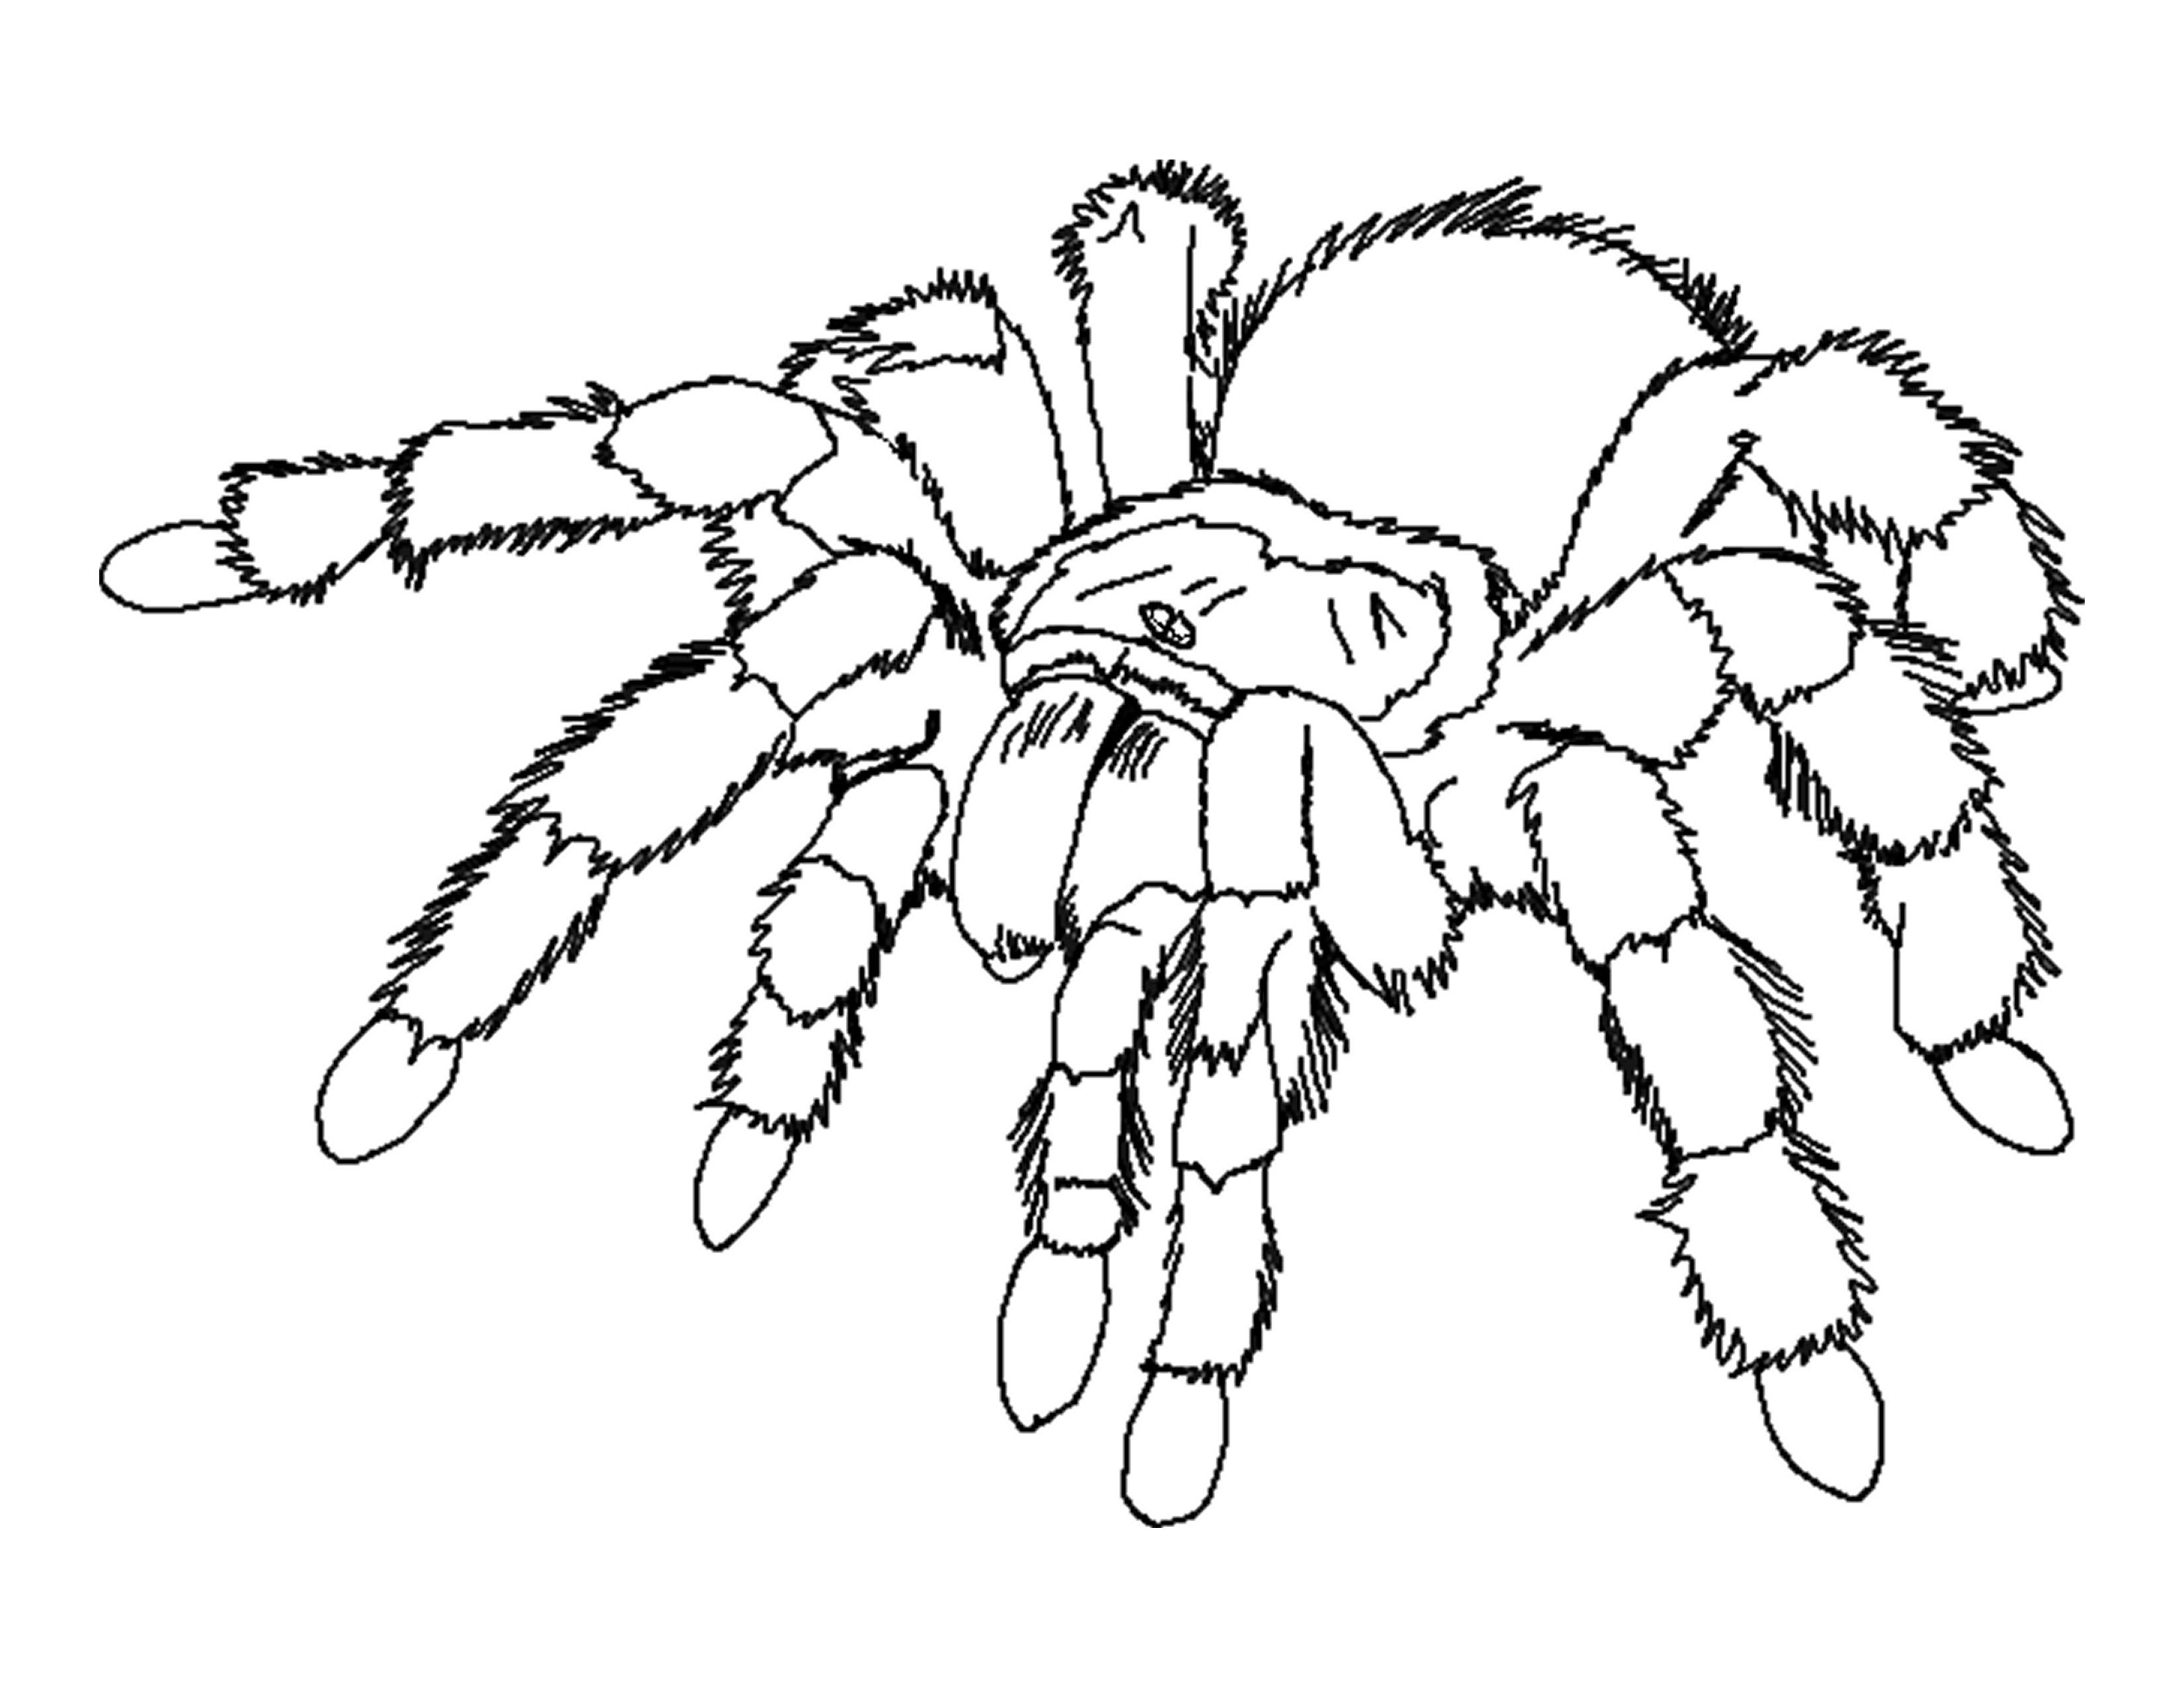 Spiders Coloring Pages For Kids
 Free Printable Spider Coloring Pages For Kids